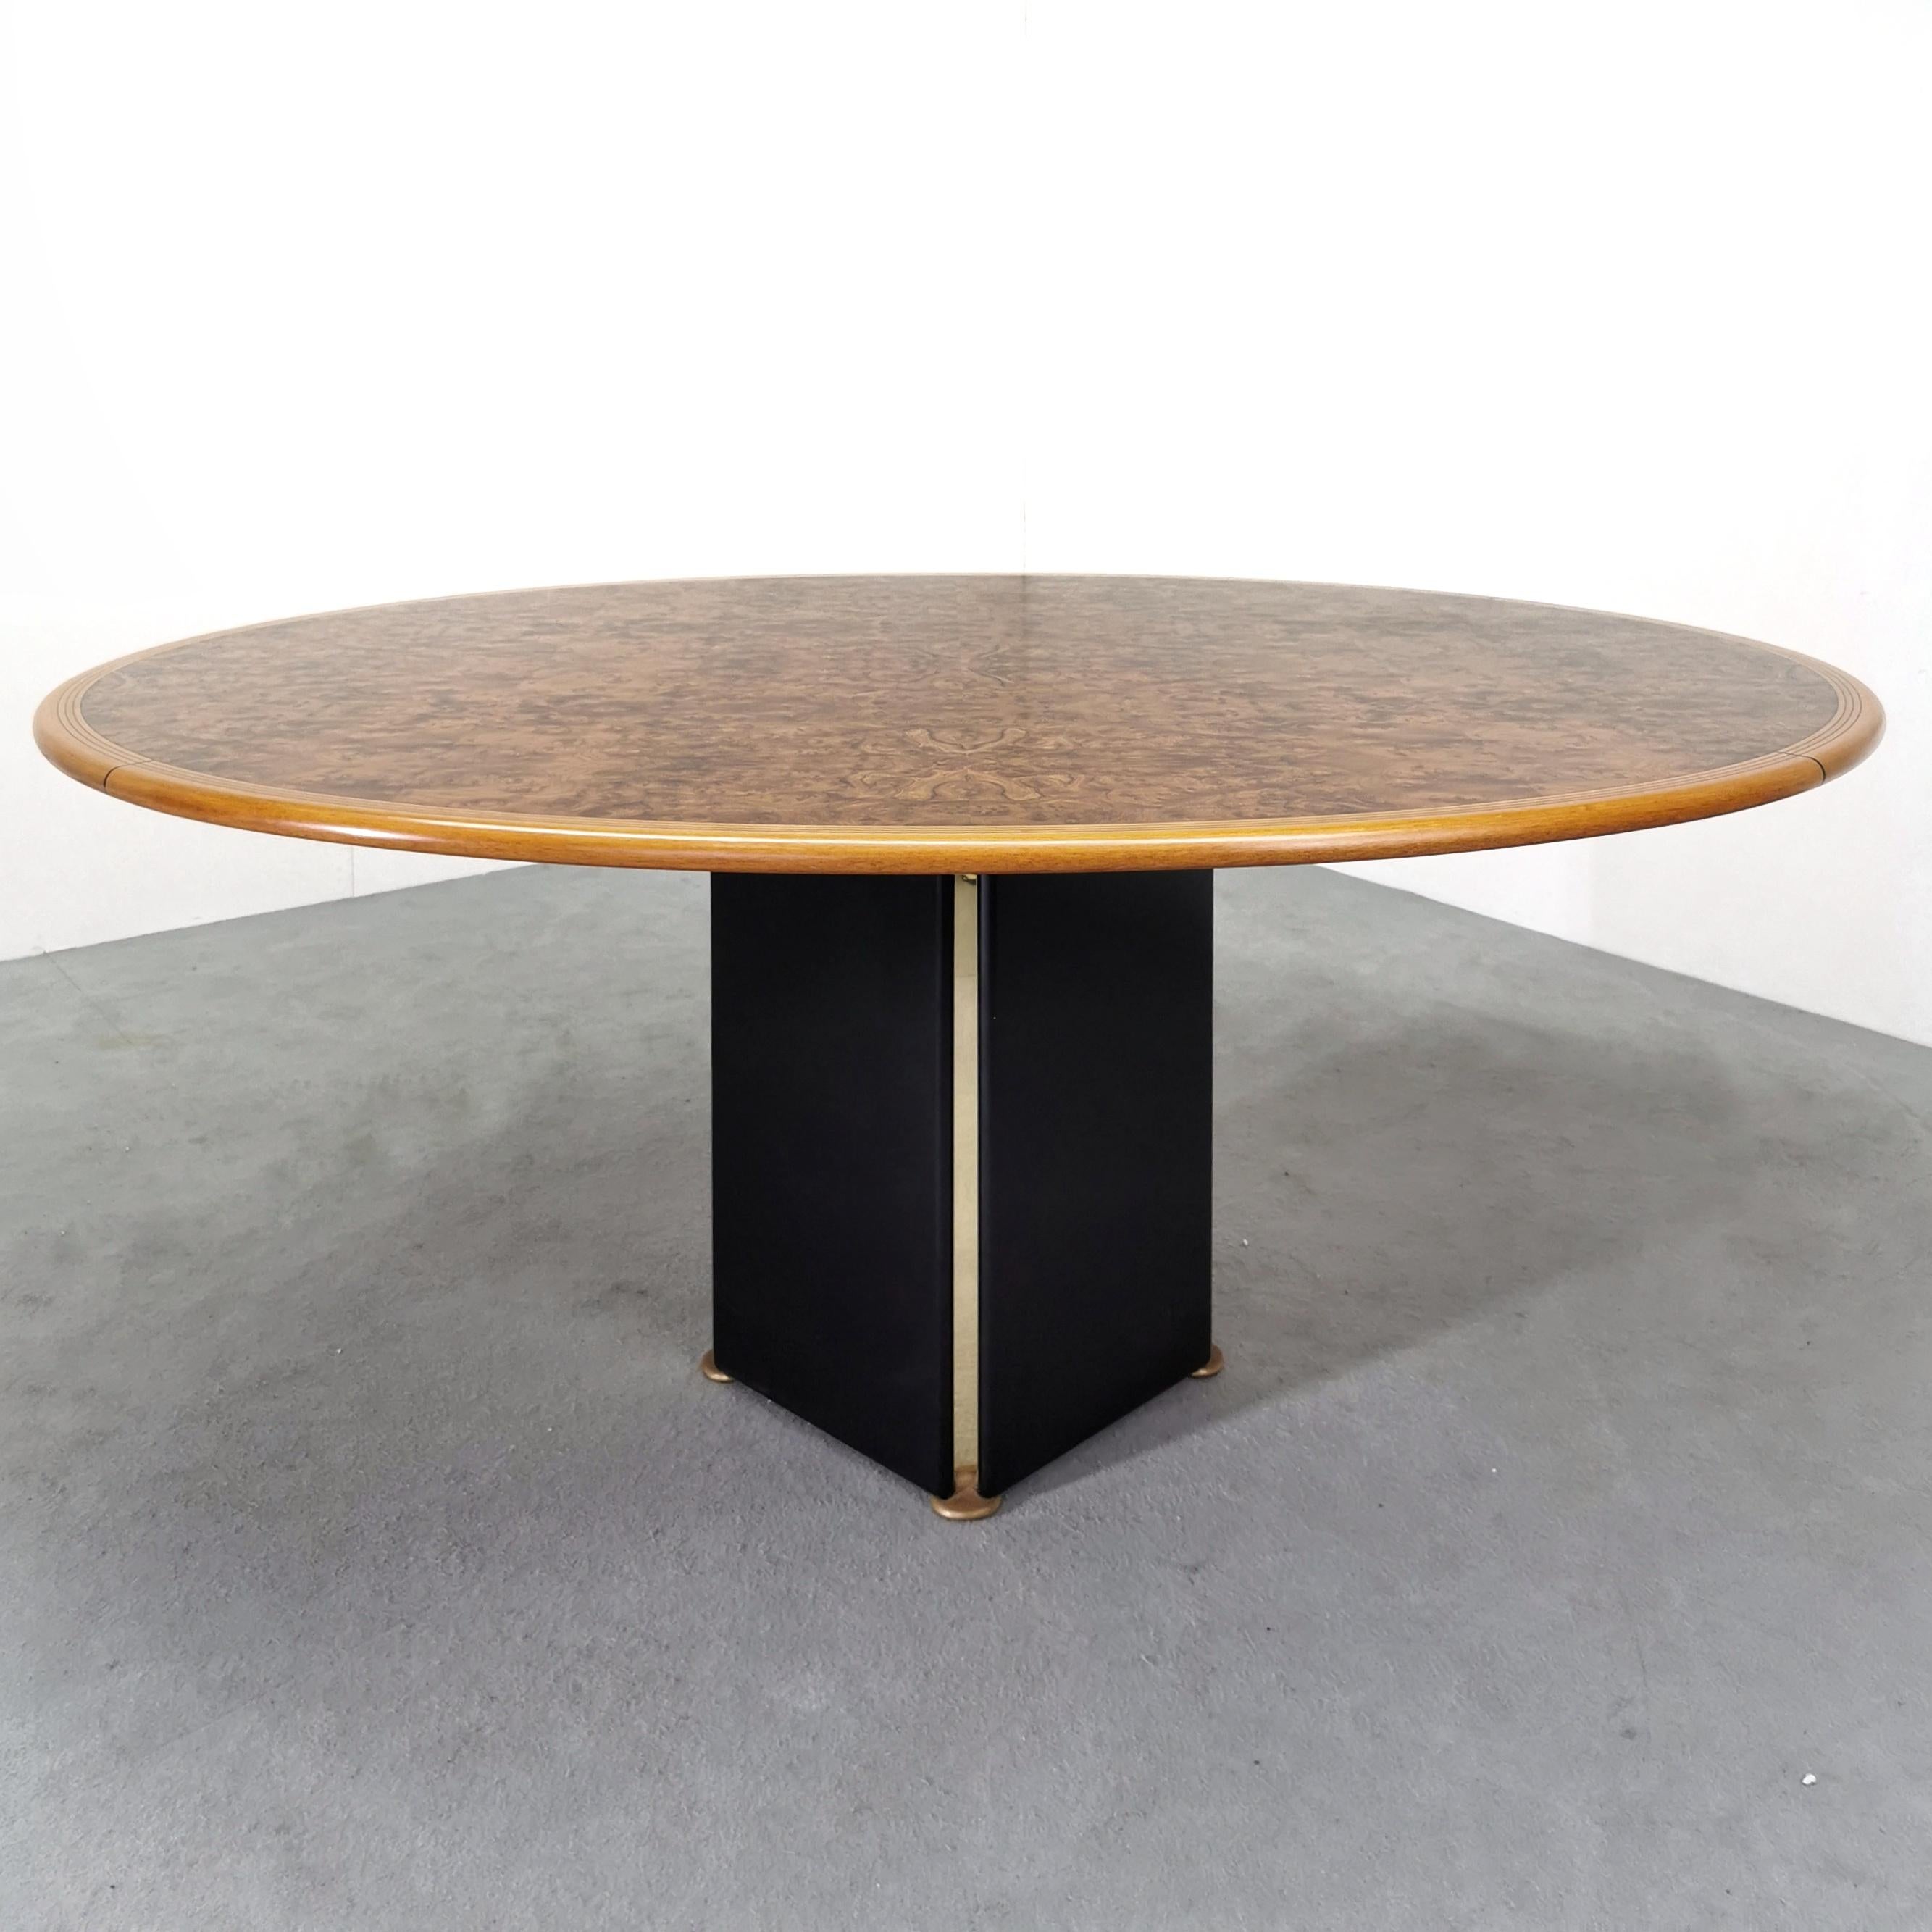 Fantastic oval-shaped dining table in burl, walnut, and brass by Afra & Tobia Scarpa. 
This table designed by the famous designers Afra and Tobia Scarpa was produced by Maxalto.
Maxalto was the brand created by B&B Italia to create luxury furniture